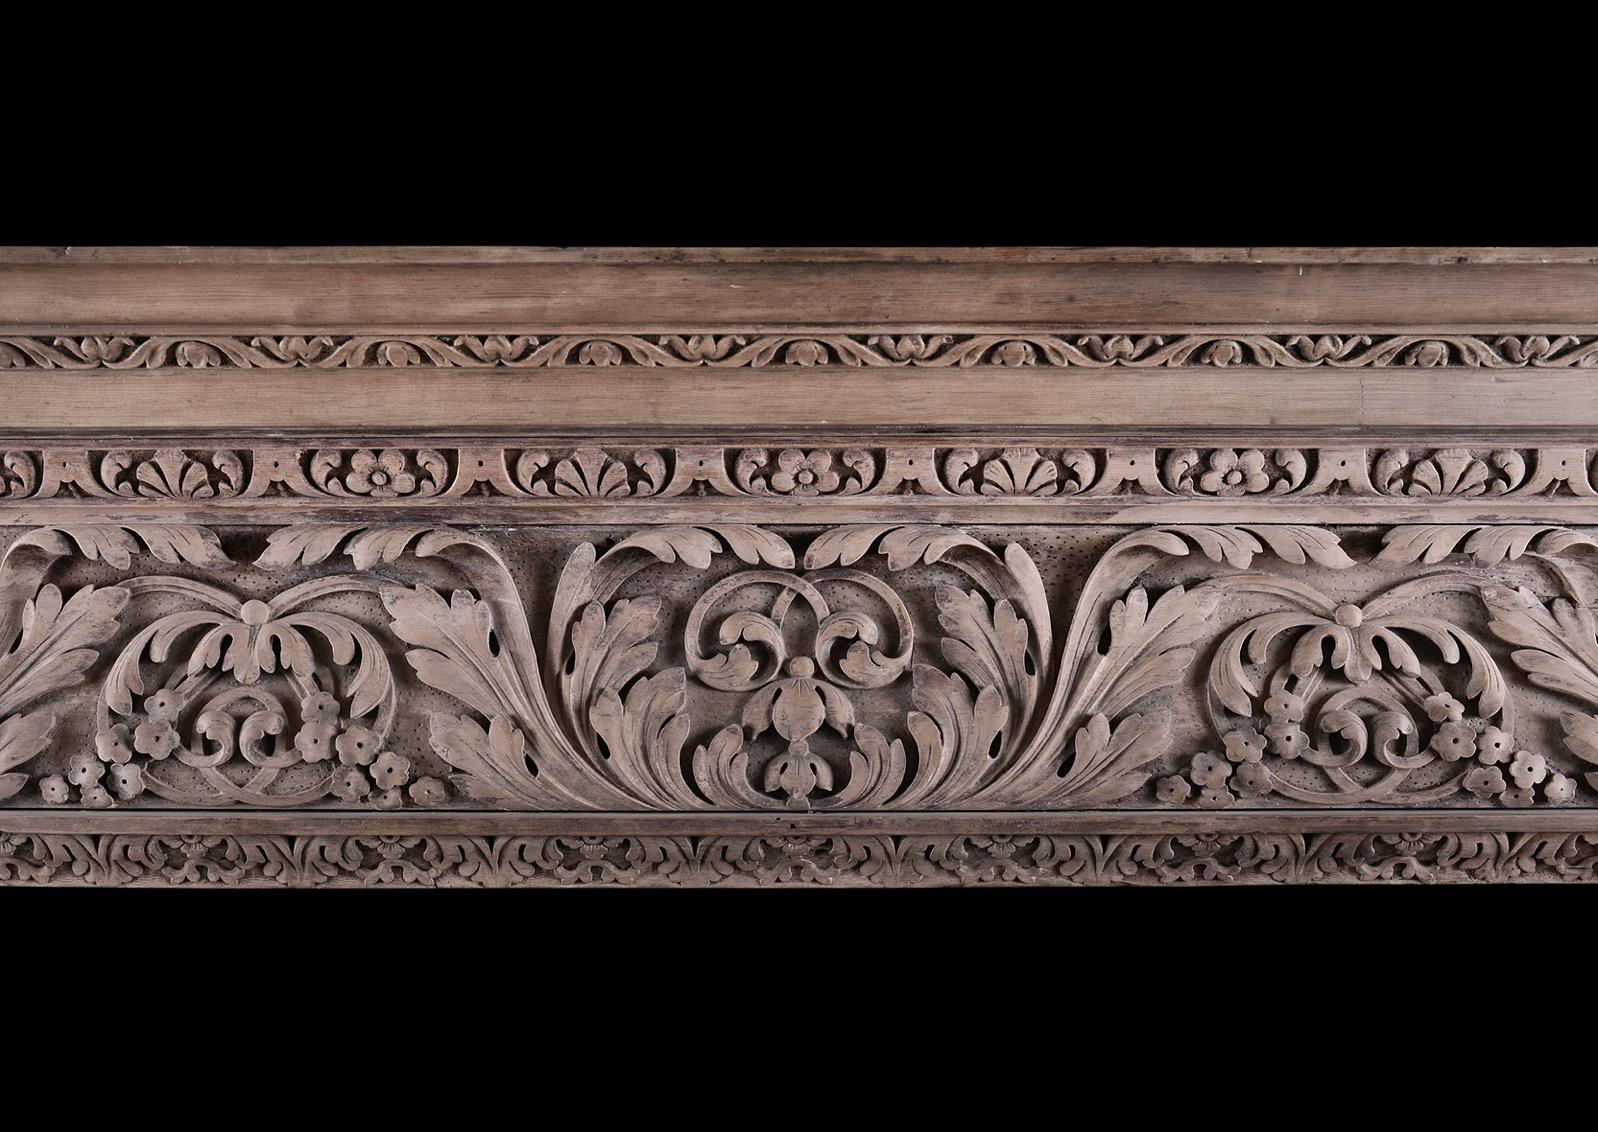 A large English carved pine mid-Georgian fireplace. The ogee shaped frieze with flowers and scrolled leafwork detail, and leaf inner moulding to frieze and breakleg jambs. The inverted breakfront shelf with carved foliage and flower mouldings, 18th